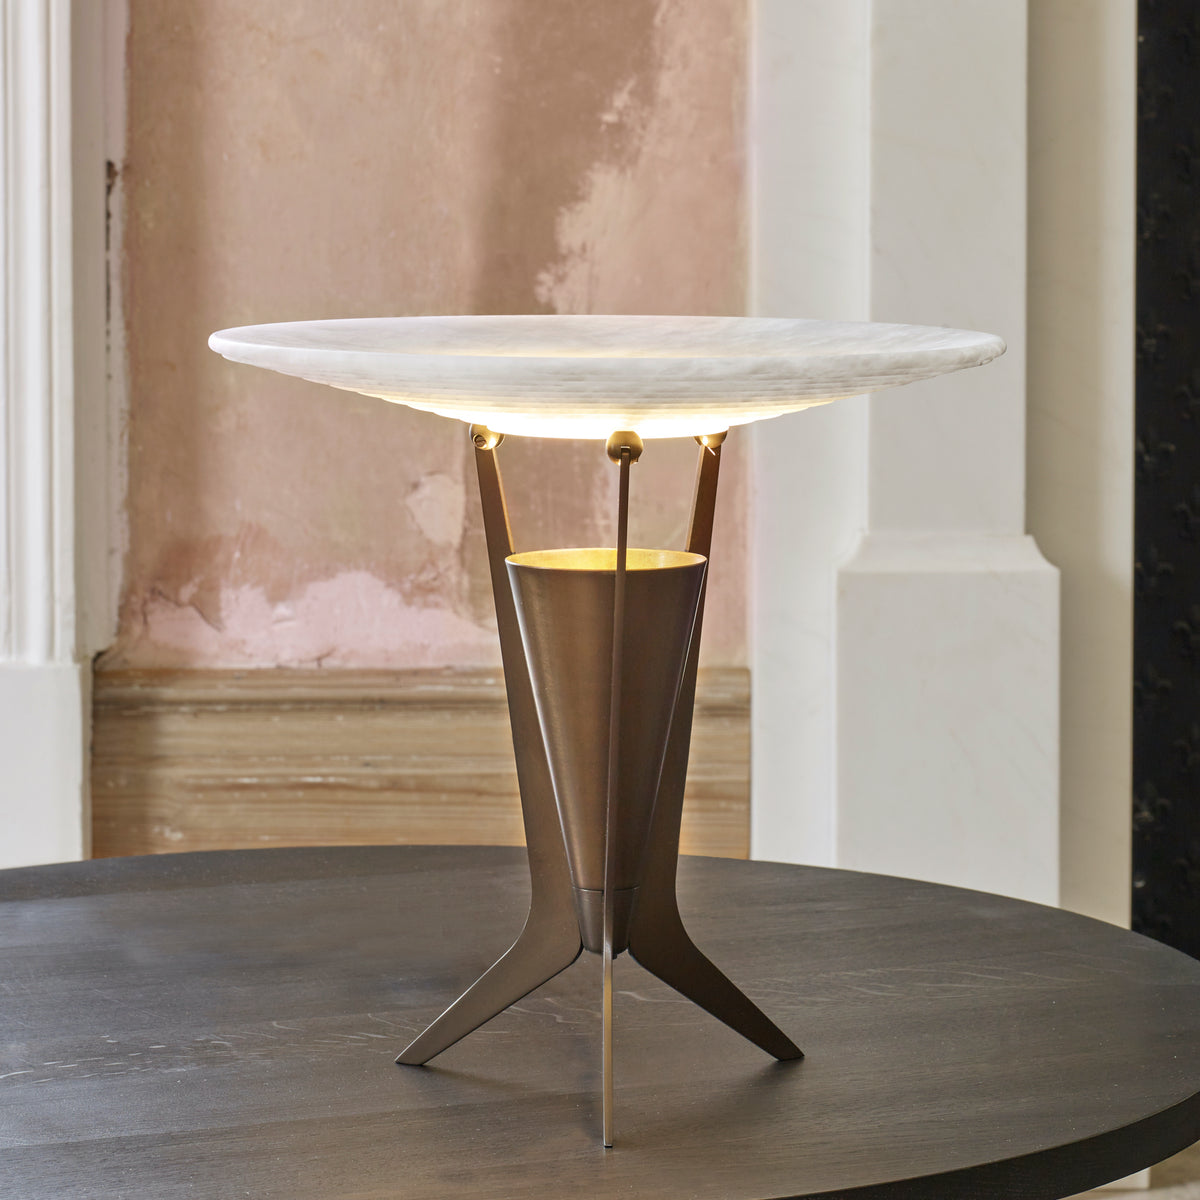 J Adams Aragon Table Light in antique brass with alabaster stone